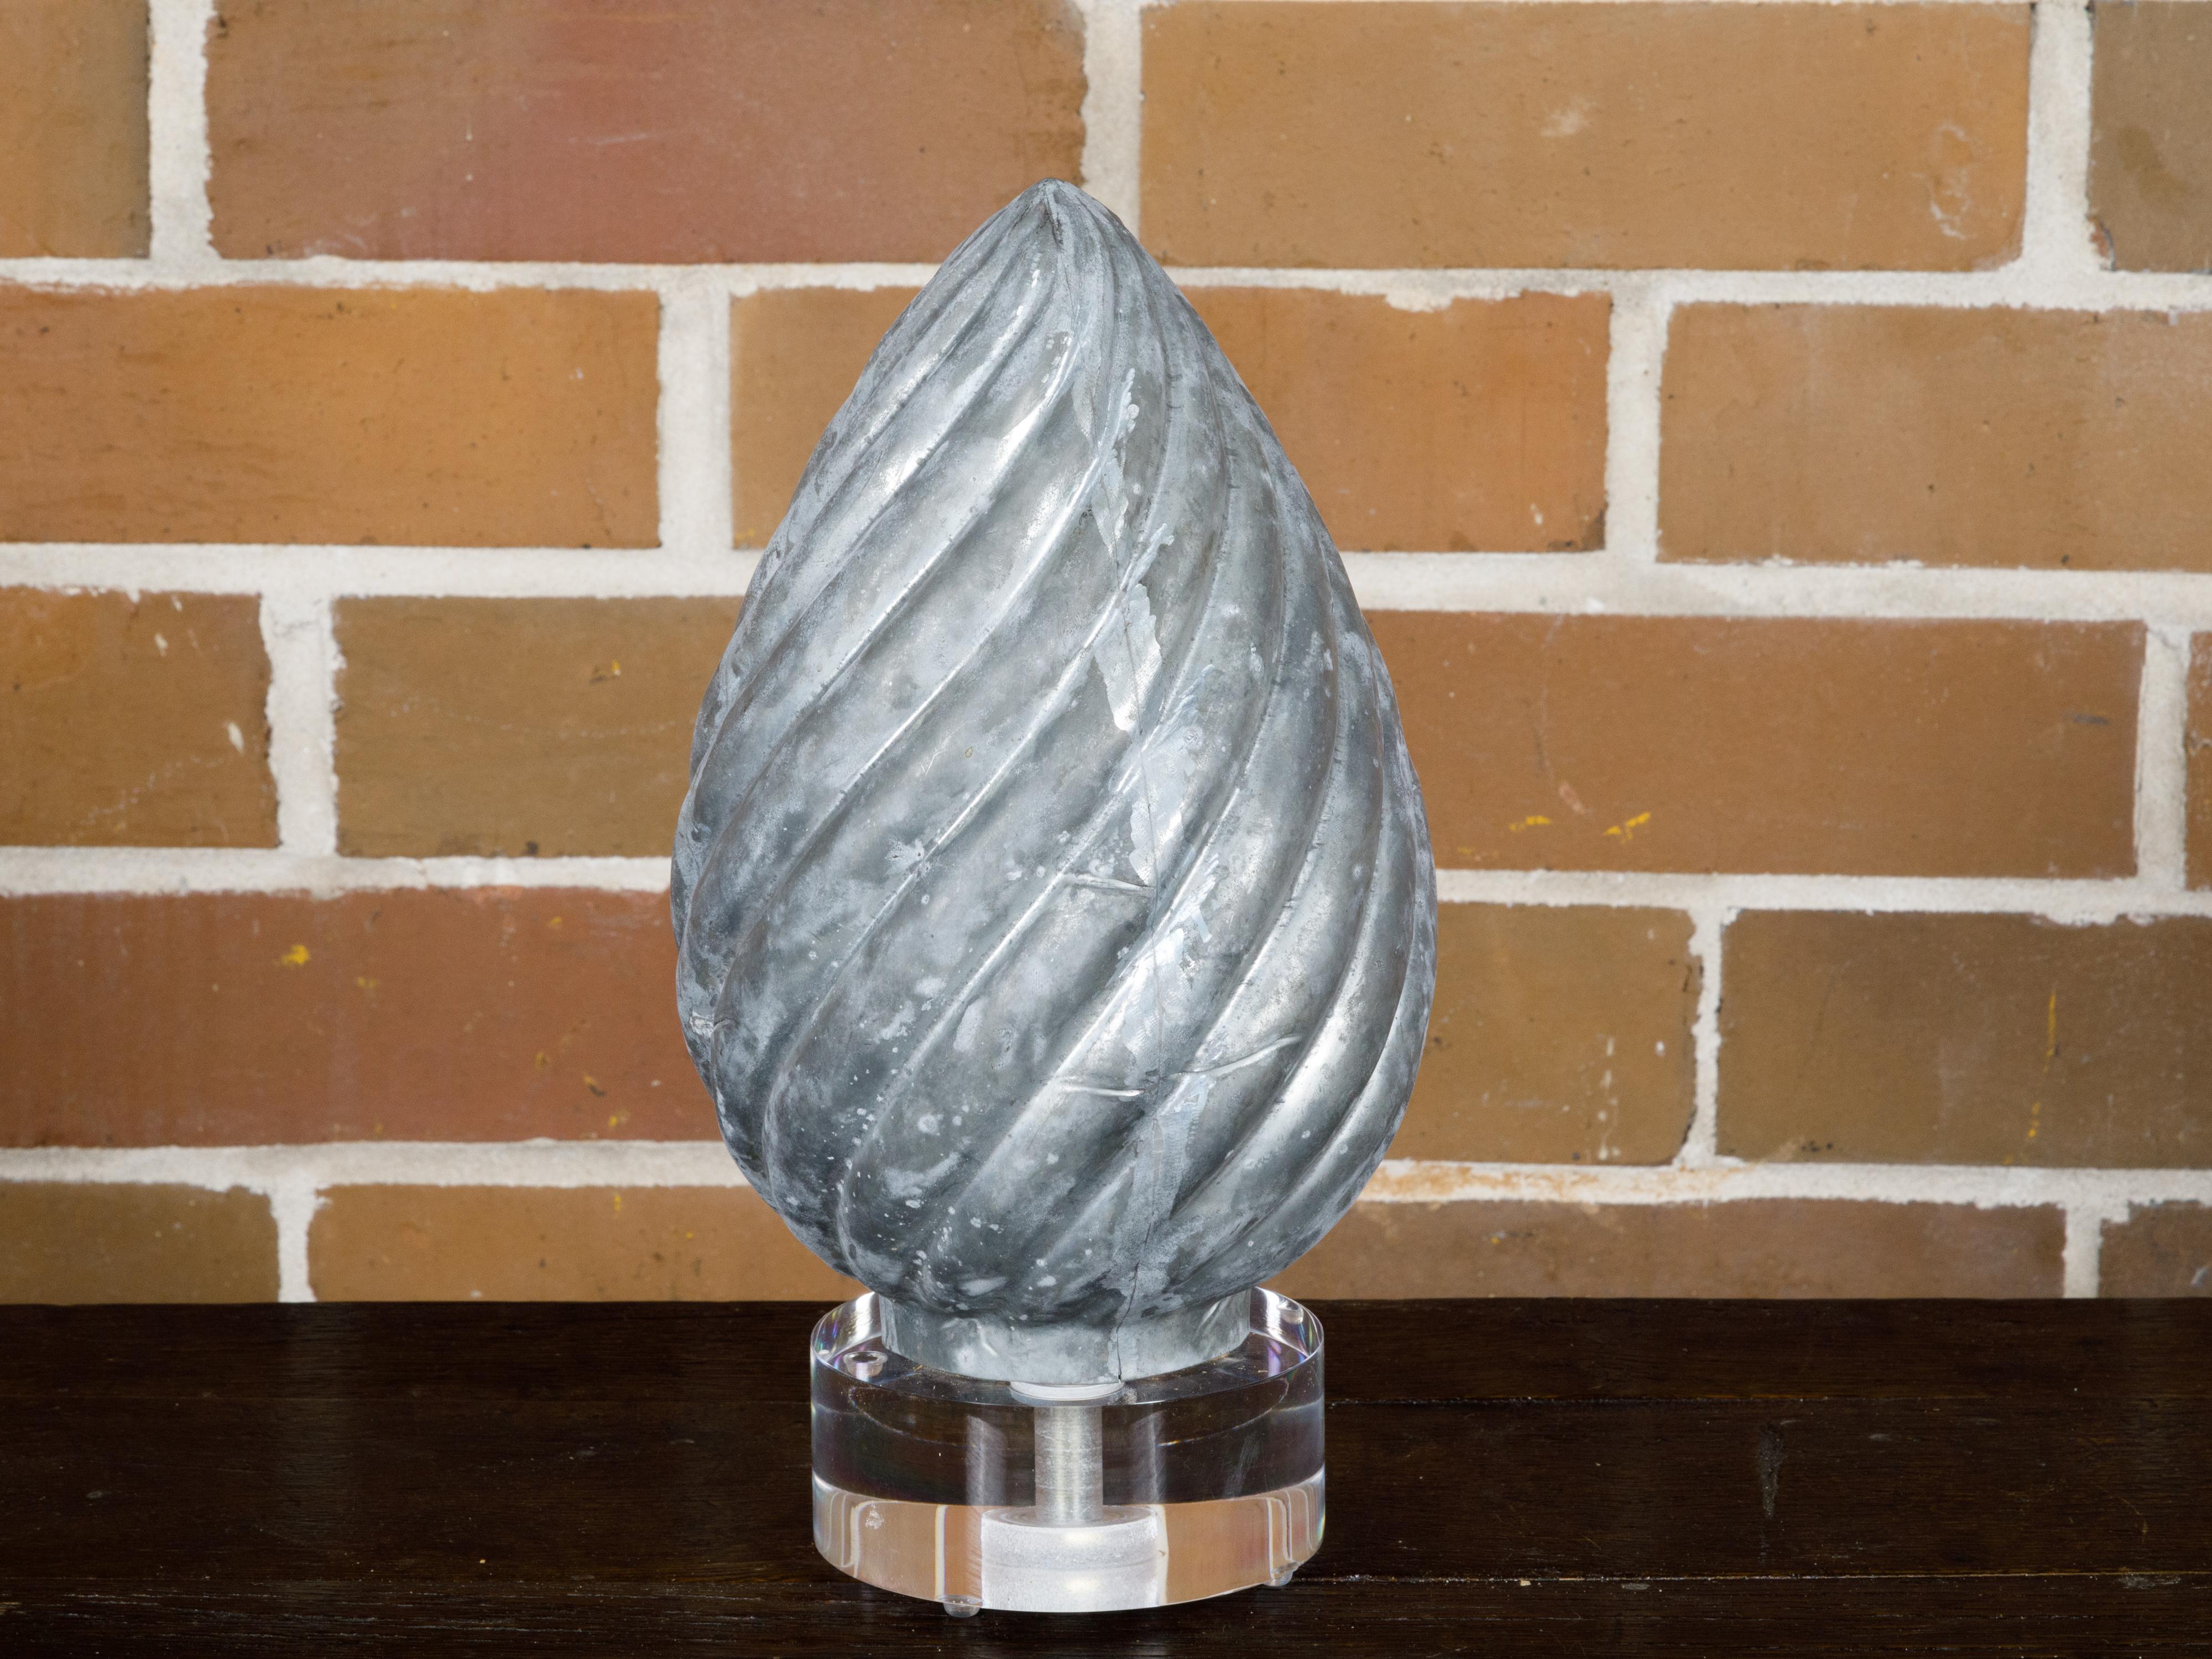 This charming French zinc pine cone shaped decorative object, hailing from circa 1920, merges the allure of nature with the refinement of vintage decor. Elegantly mounted on a circular lucite base, this piece encapsulates the beauty and simplicty of